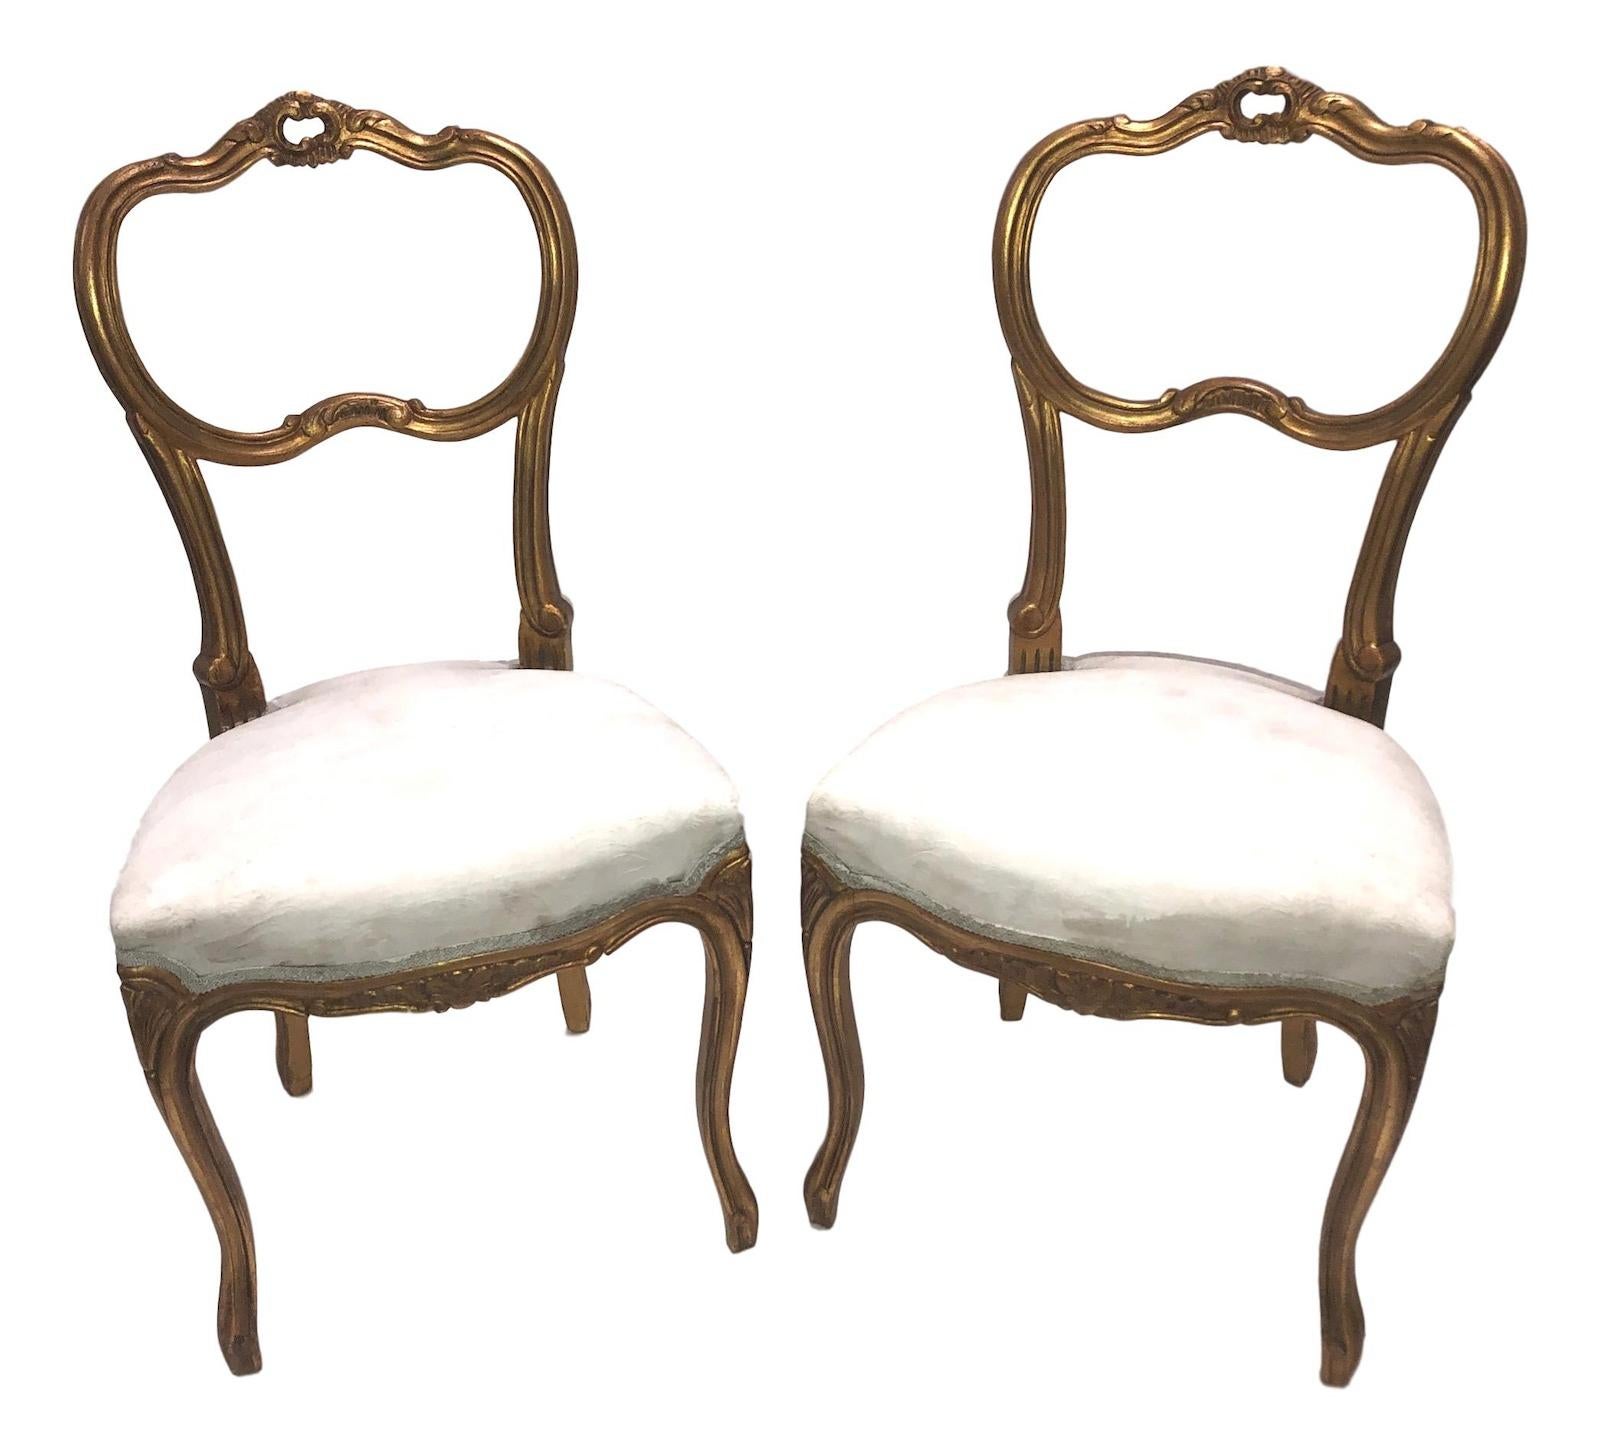 This is a beautiful pair of antique Swedish giltwood chairs, circa 1920 in date.
The giltwood is beautiful in color, each chair features a shell carved crested toprail with acanthus clasped supports.
They have been not reupholstered and are in the